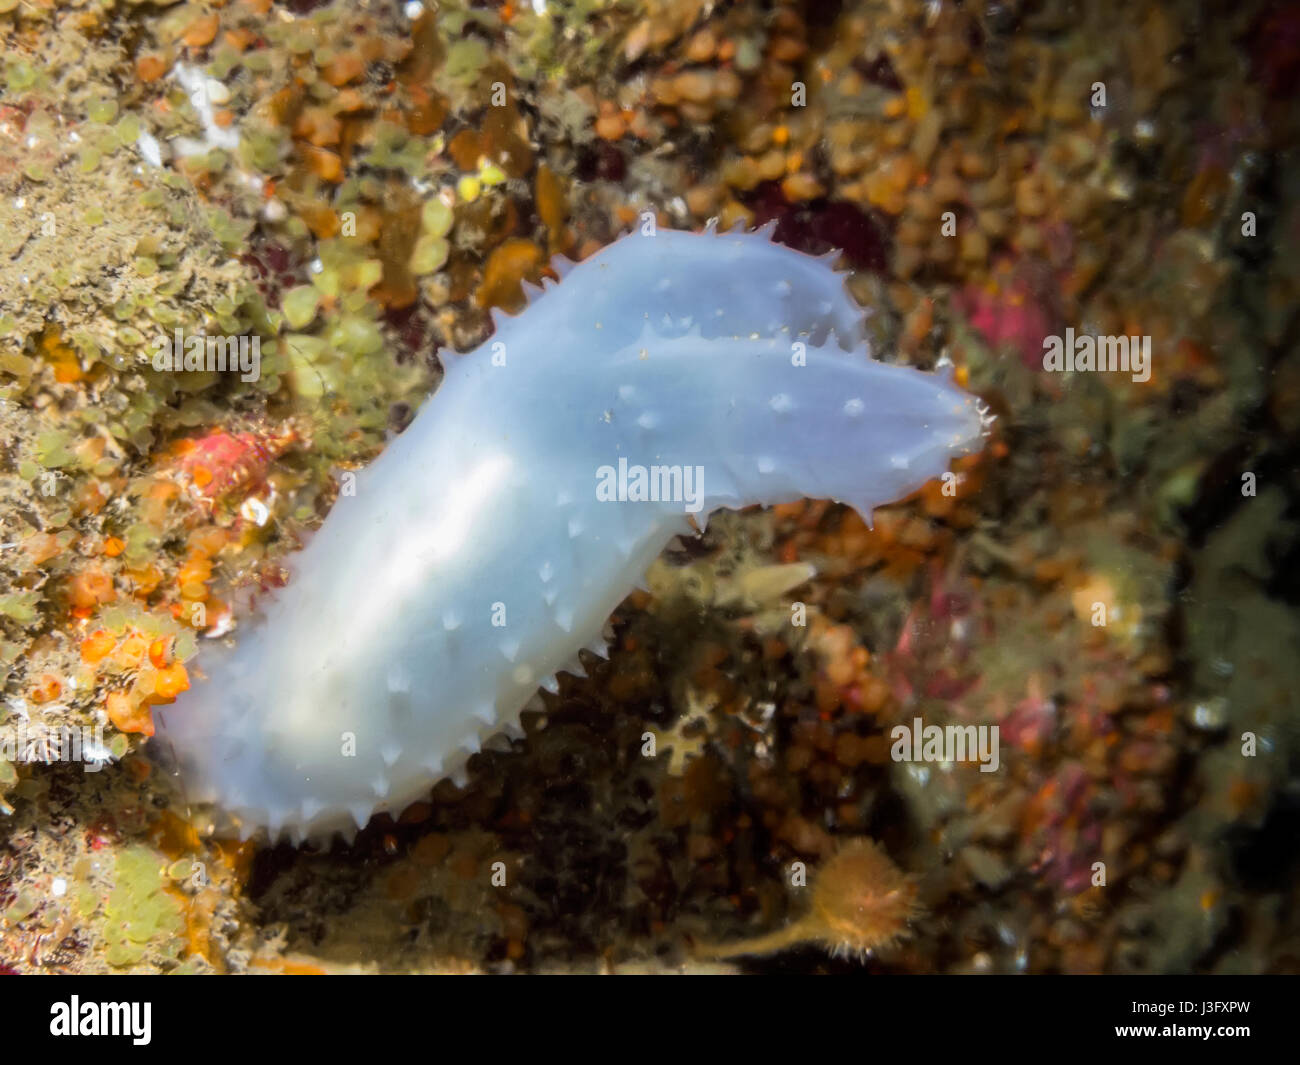 Glassy Tunicate photographed in the dark cold waters of southern British Columbia at a depth of 70ft. Stock Photo